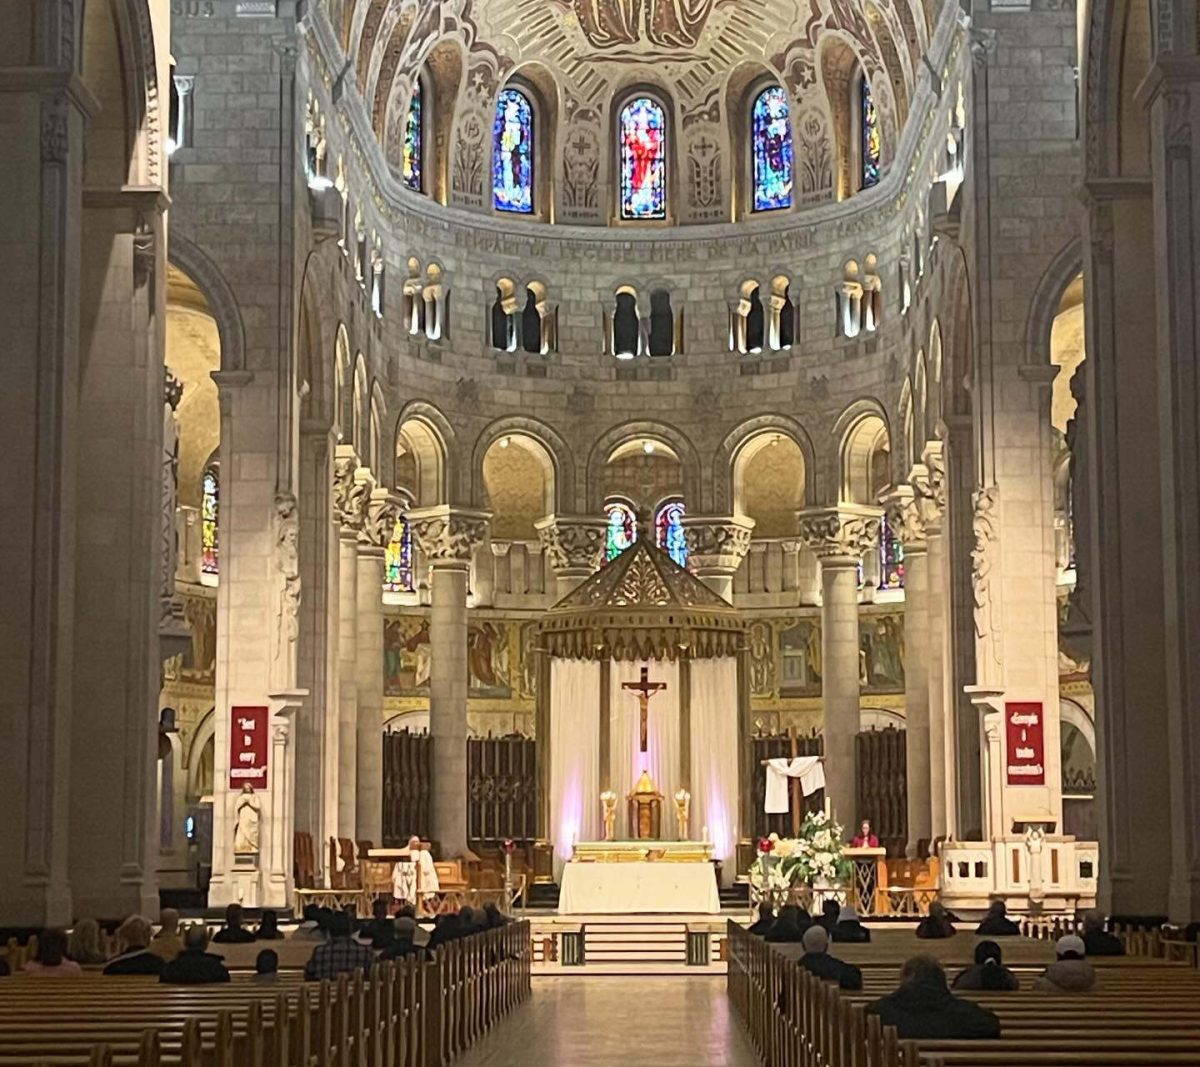 Students+visited+the+Basilica+of+Saint+Anne-de-Beaupr%C3%A9+in+Quebec%2C+Canada.+The+Basilica+of+Saint+Anne-de-Beaupr%C3%A9+is+a+Roman+Catholic+church%2C+and+one+of+eight+national+shrines+in+all+of+Canada.+%28Courtesy+of+Bella+Starr%29